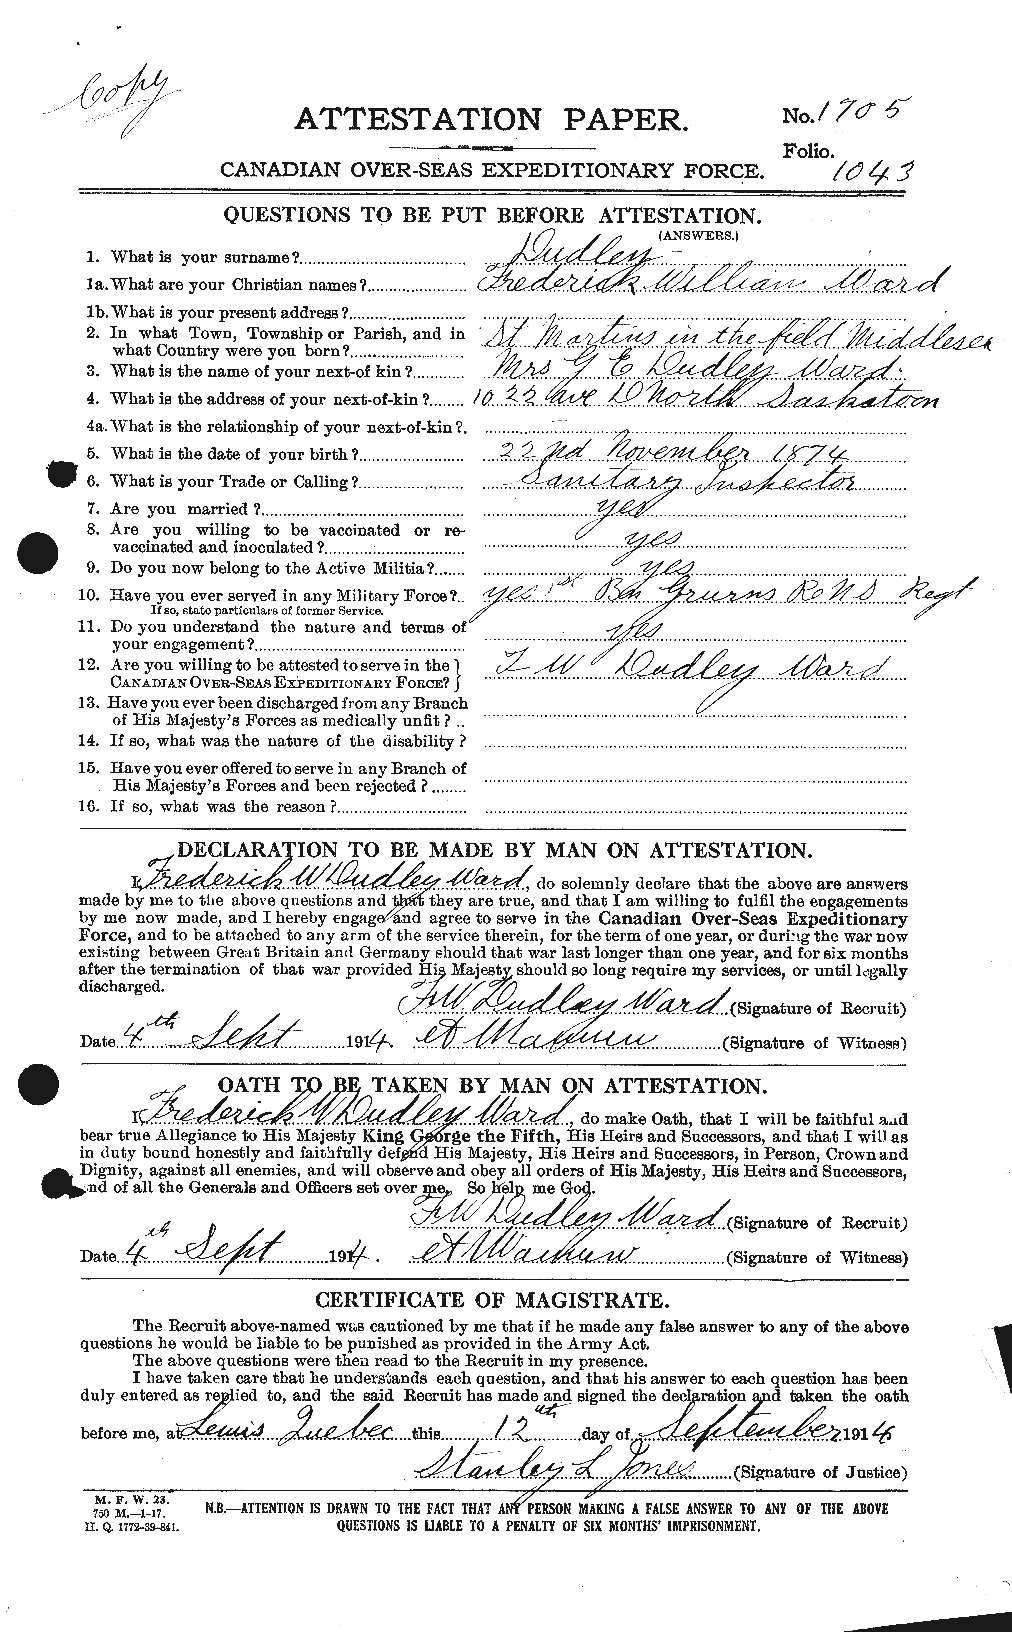 Personnel Records of the First World War - CEF 304884a